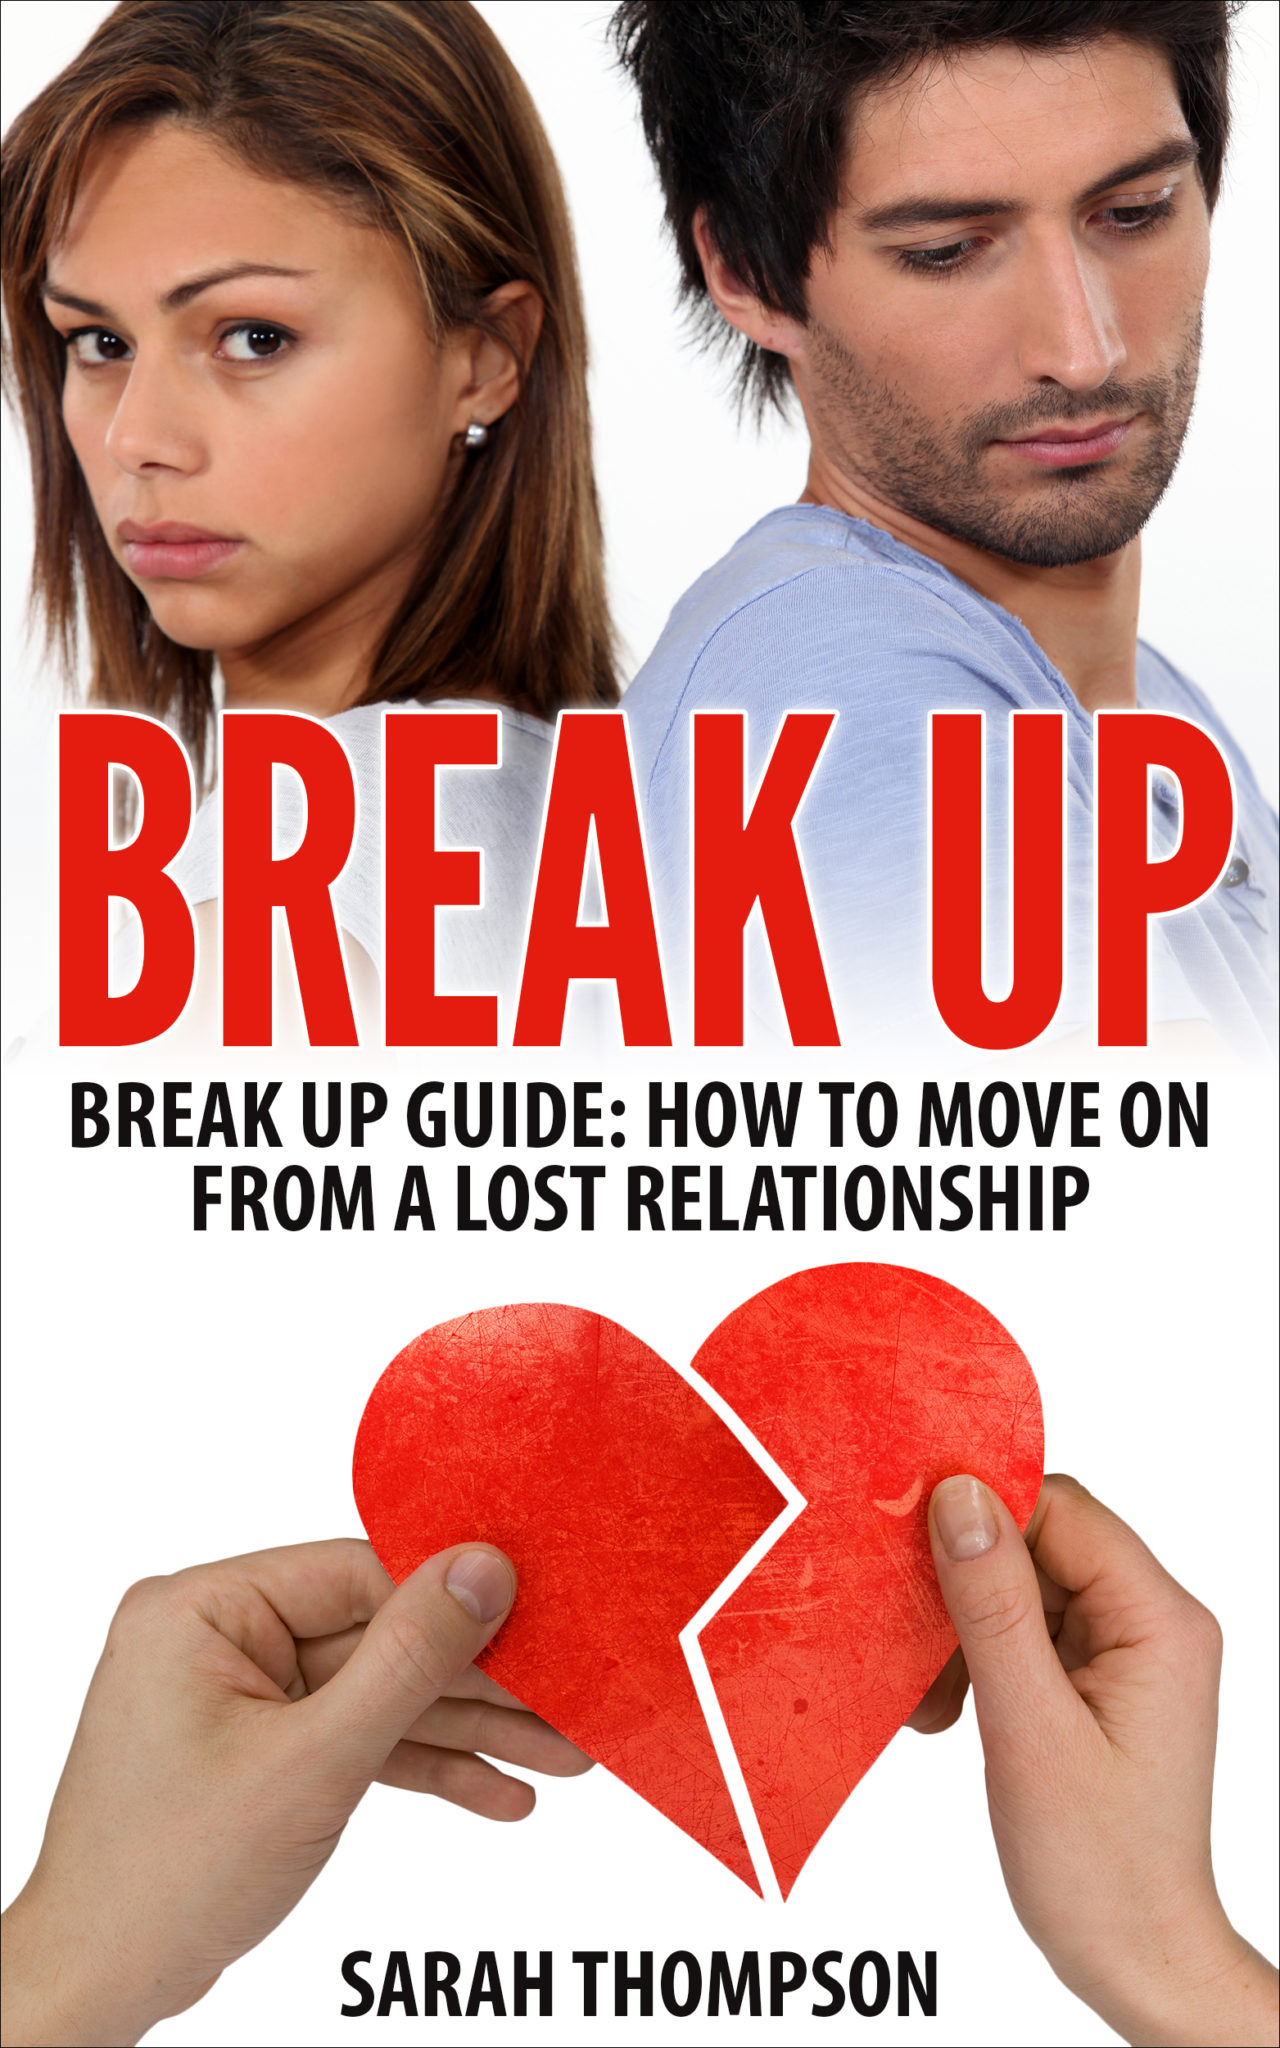 FREE: Break Up: How to Move on from a Lost Relationship by Sarah Thompson